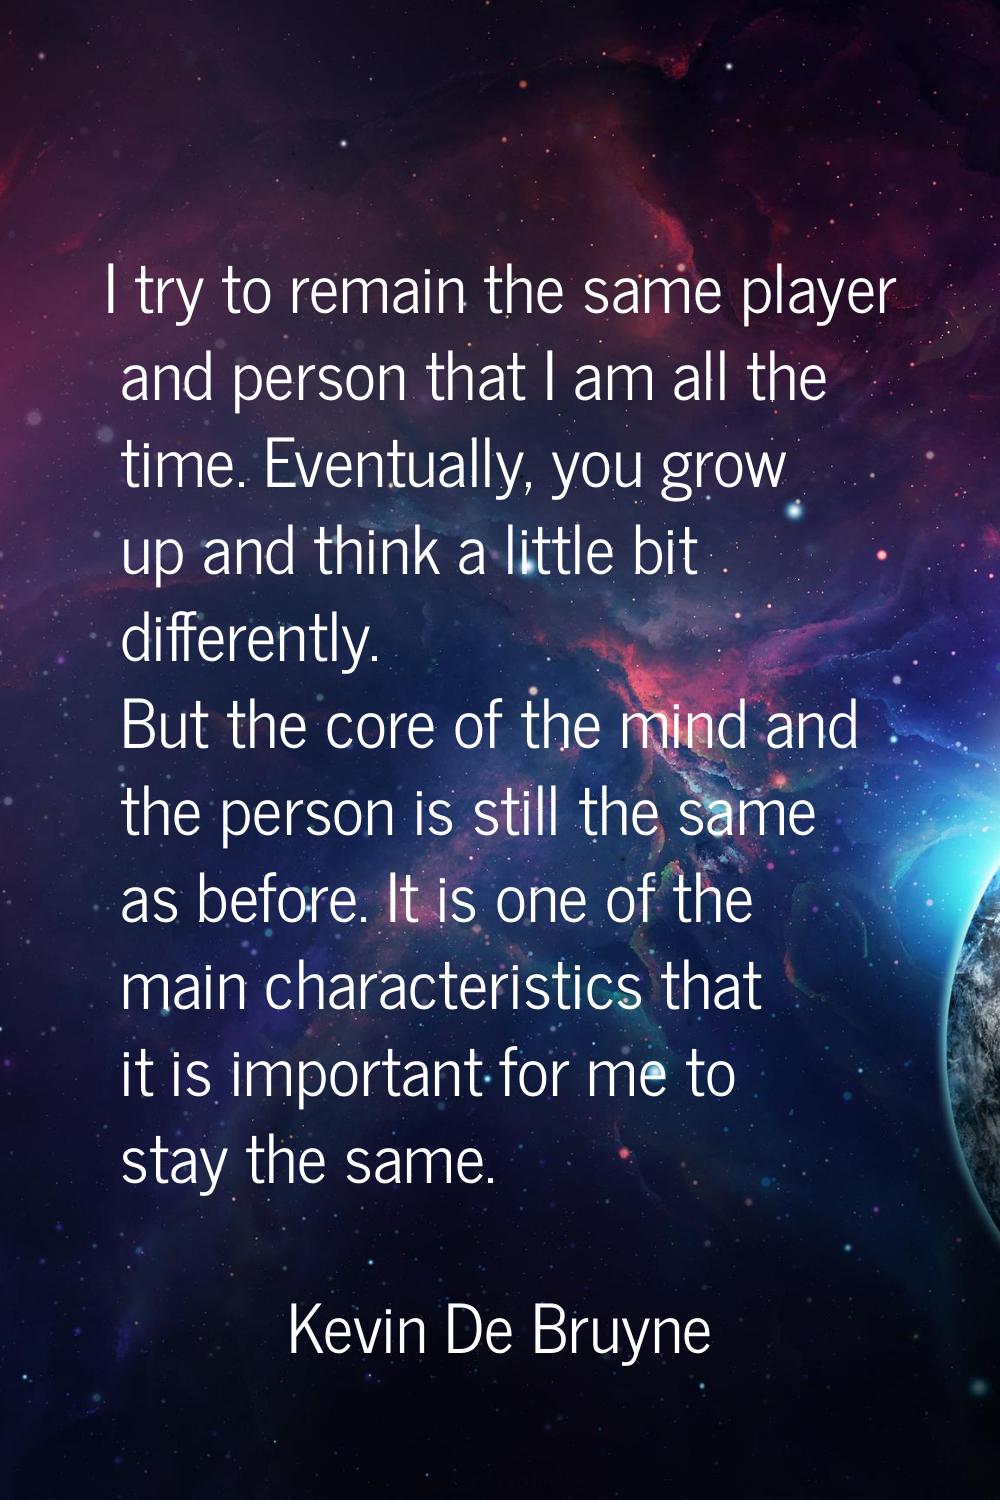 I try to remain the same player and person that I am all the time. Eventually, you grow up and thin